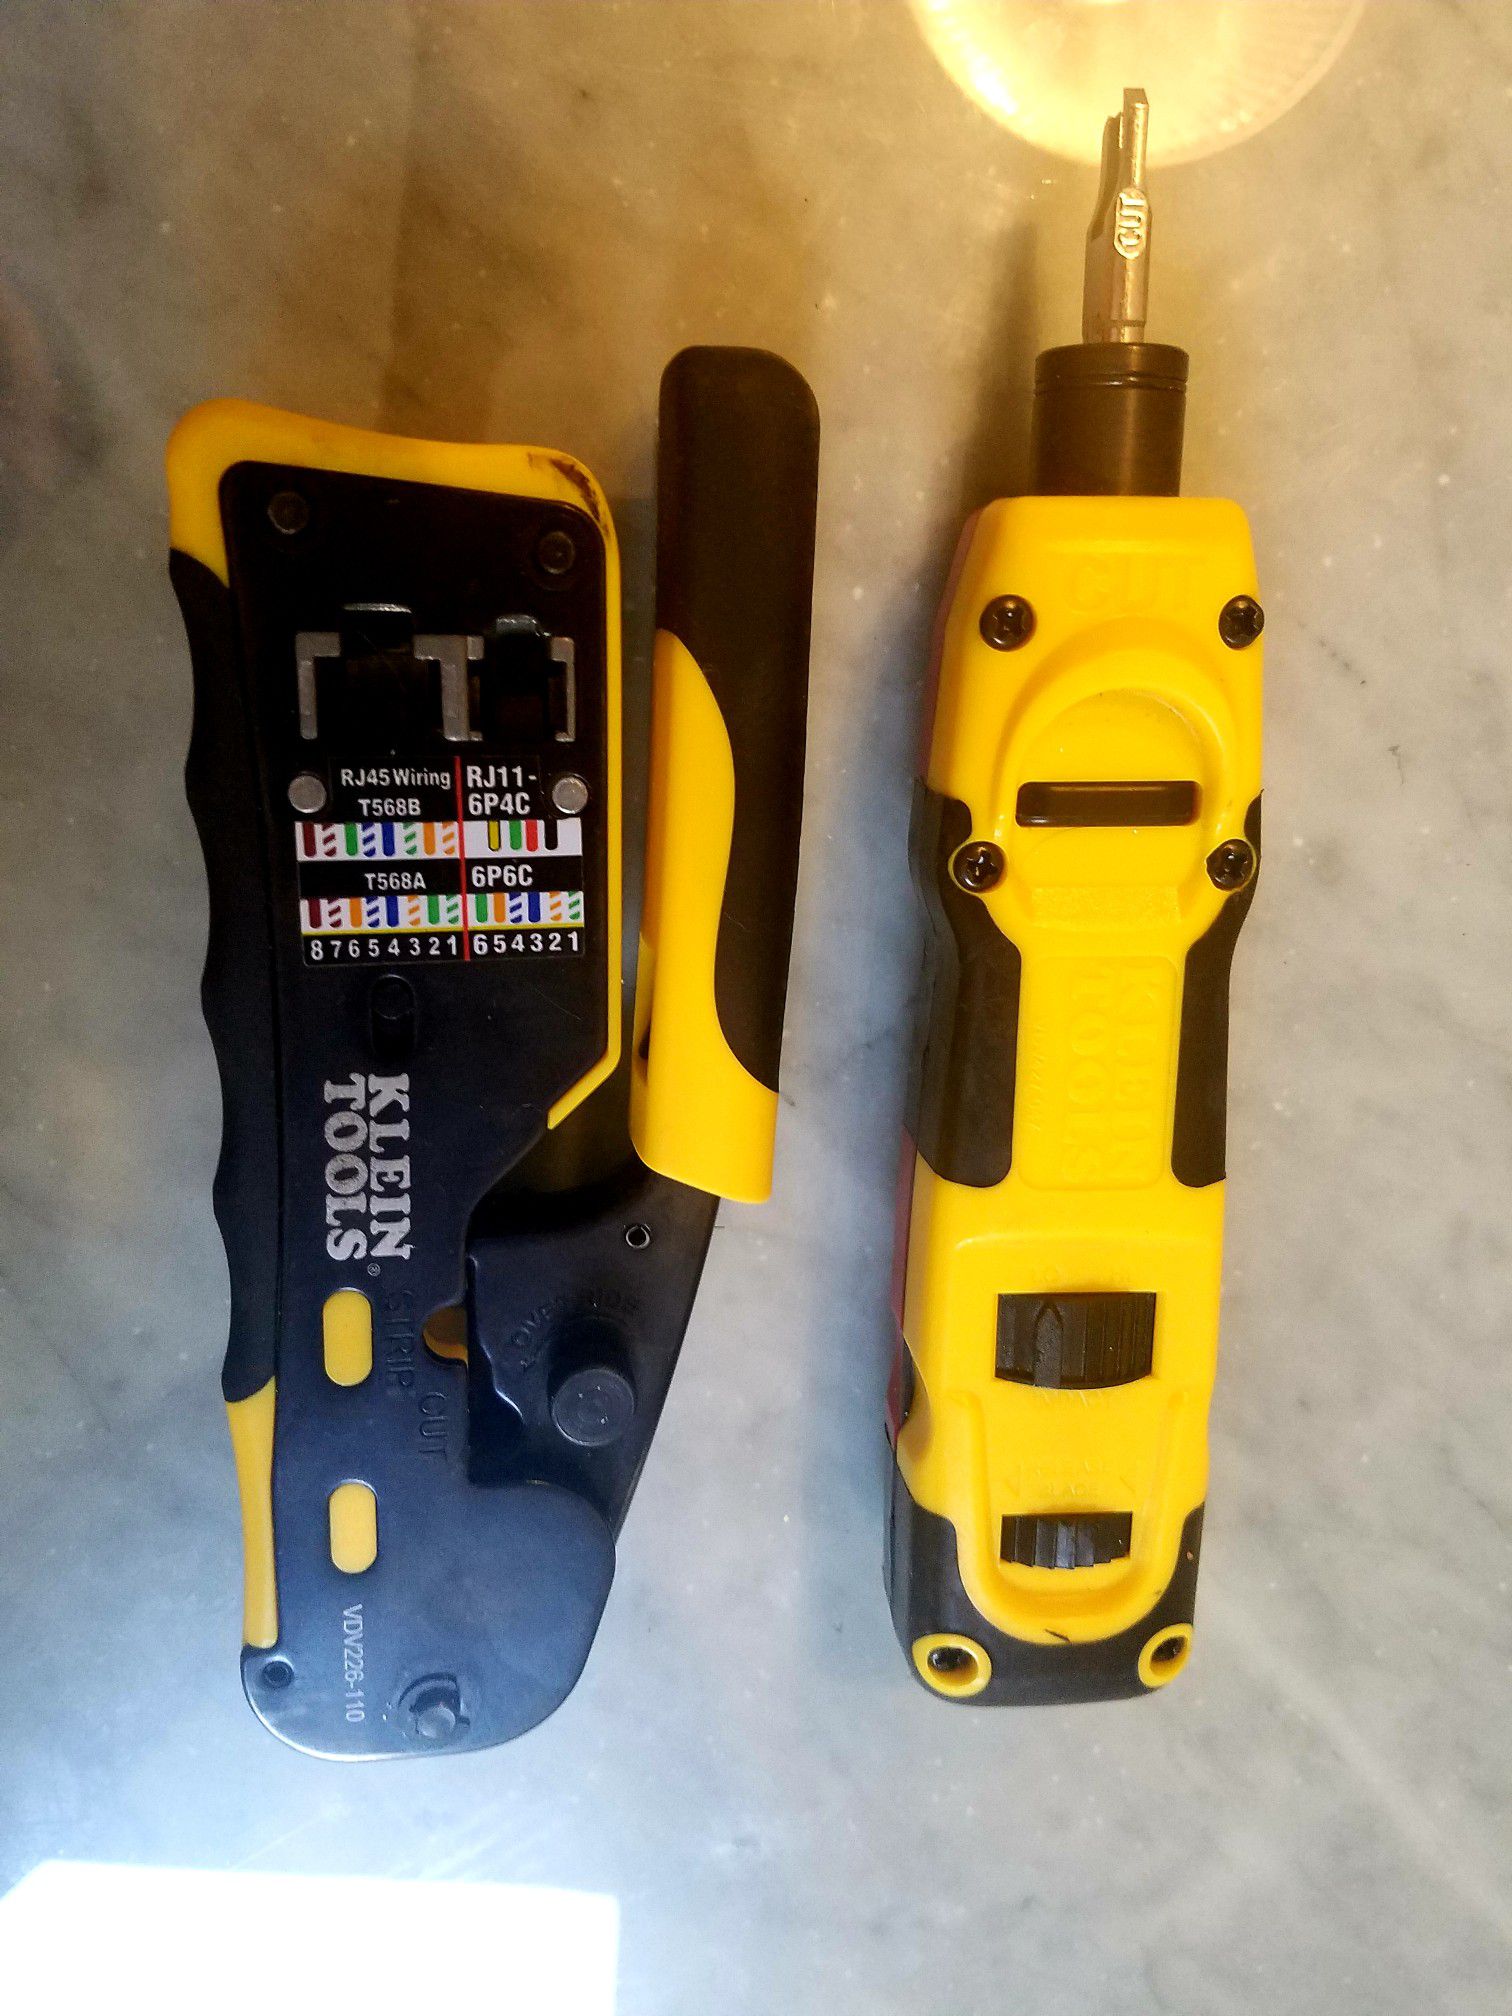 For Sale two Klein Tools VDV427-047 Punch Down Impact Tool And A Pass-Thru  Modular Wire Crimper, Reliable Klein Tools VDV226-110 BOTH TOOL $35 Firm  for Sale in La Mesa, CA OfferUp